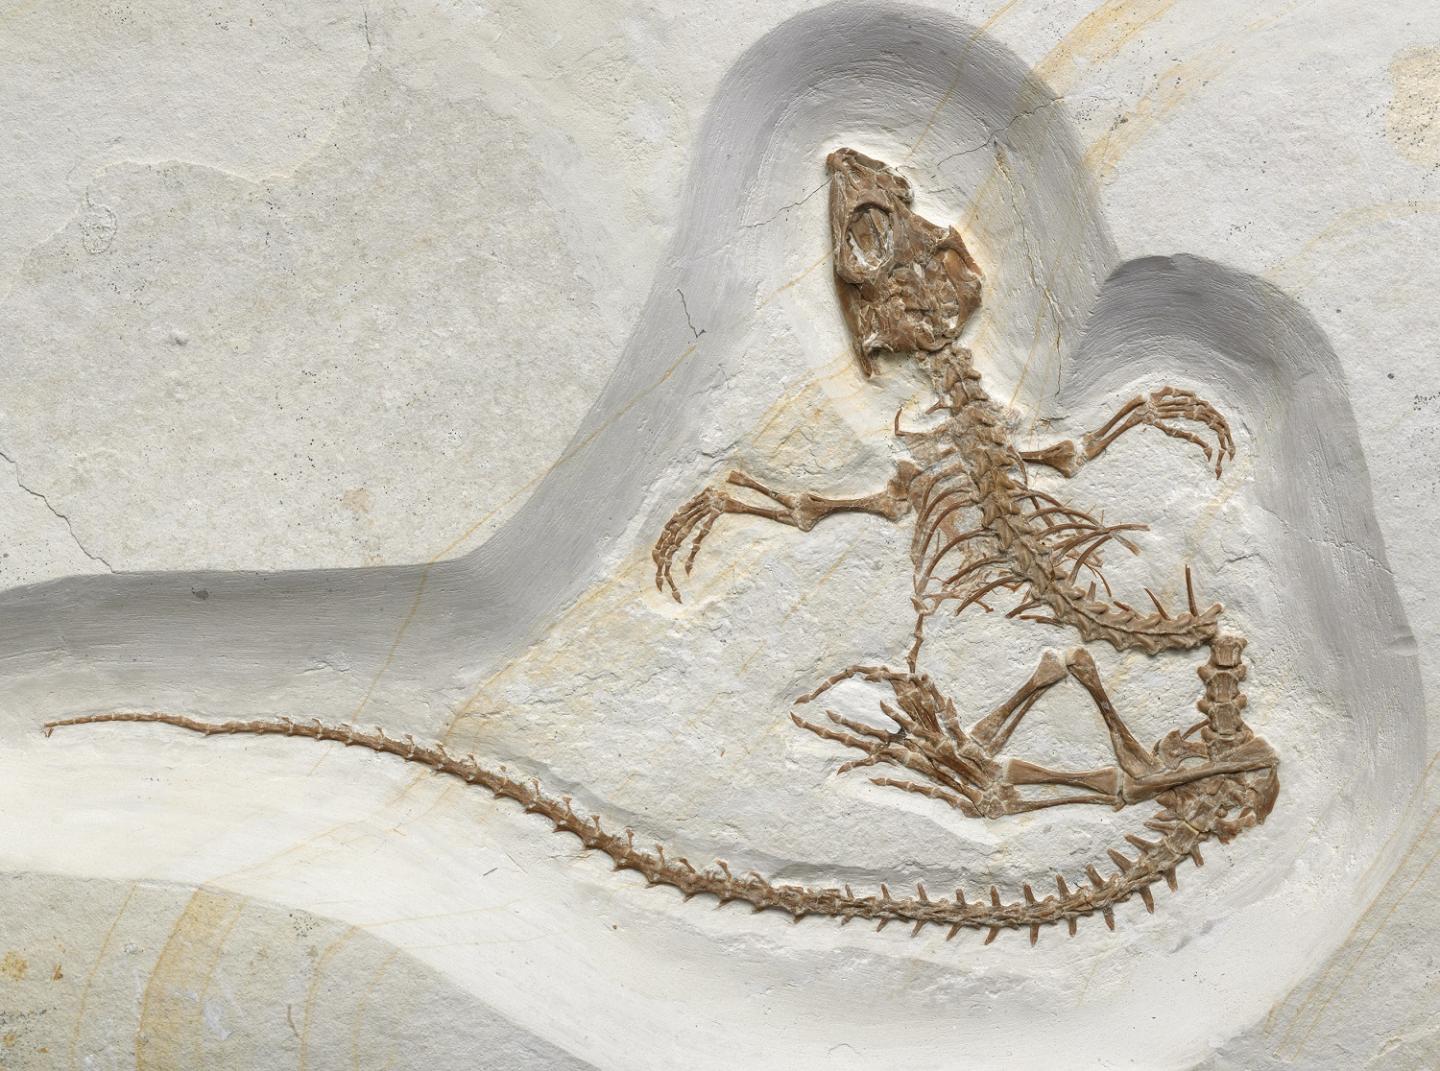 Vadasaurus Fossil Shows a Reptile in Transition